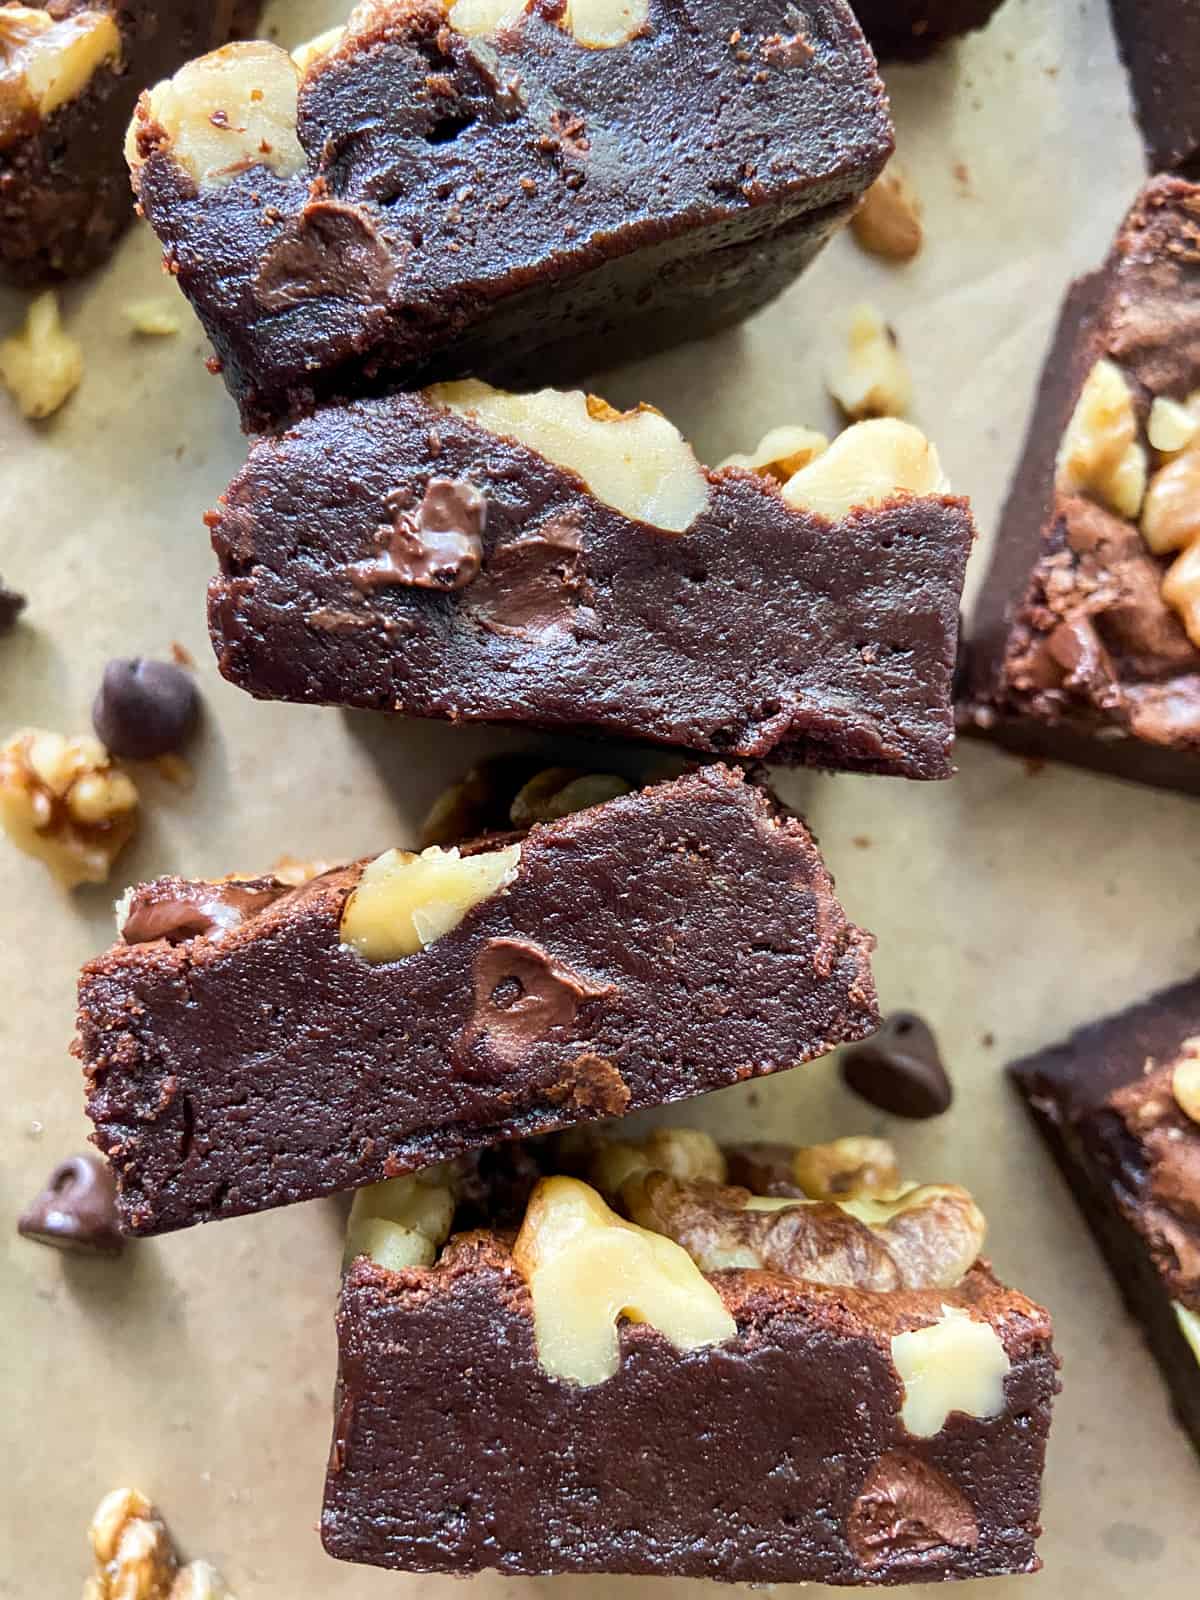 A close-up of fudgy double chocolate brownies with walnuts and chocolate chips.